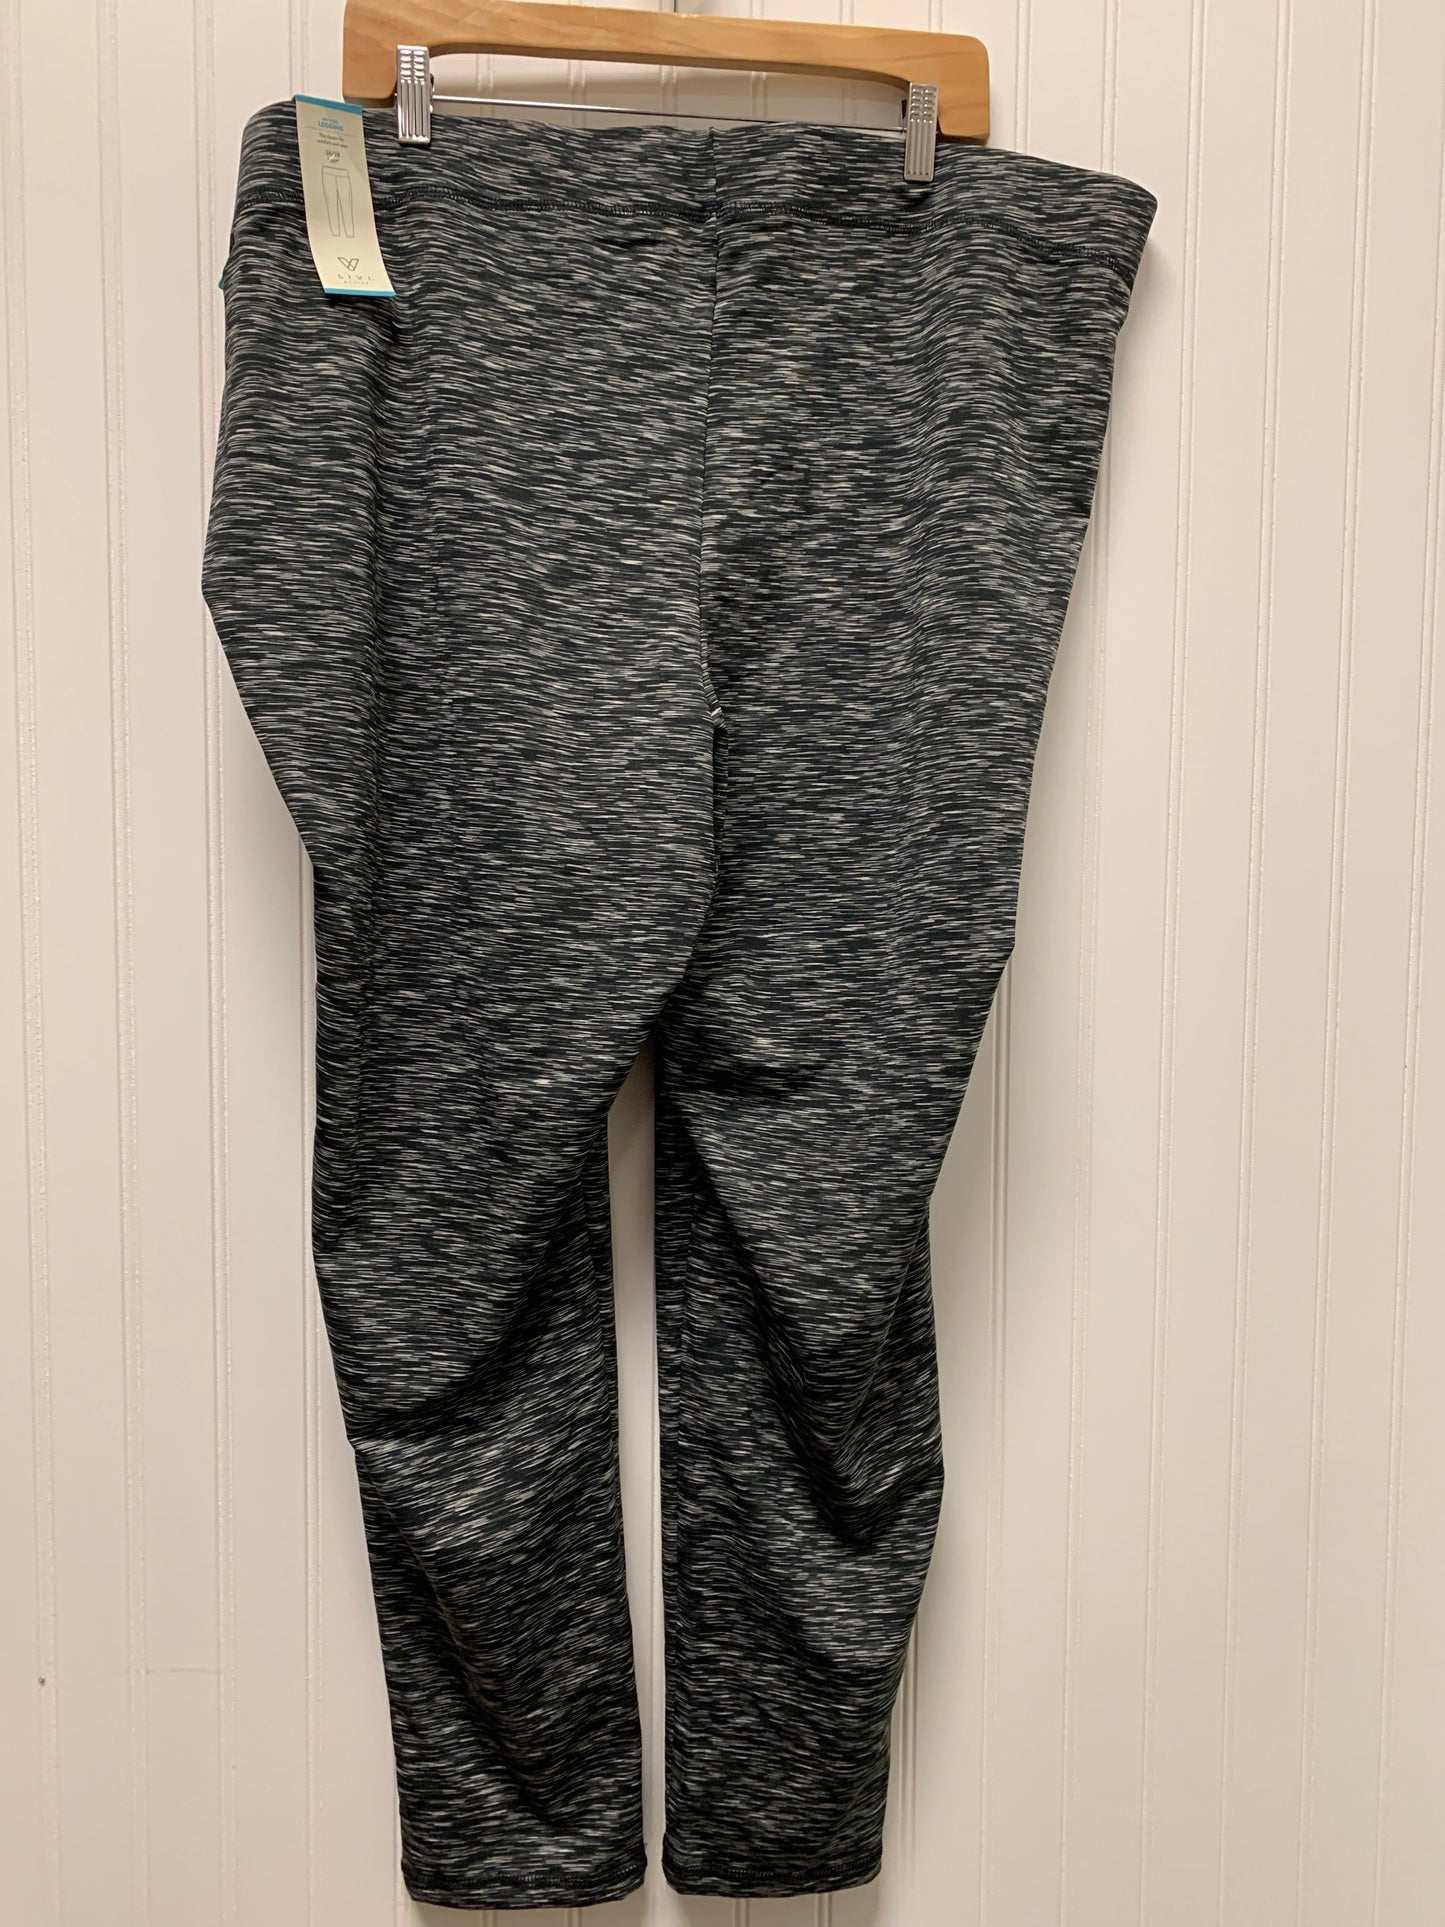 Athletic Leggings By Livi Active  Size: 3x